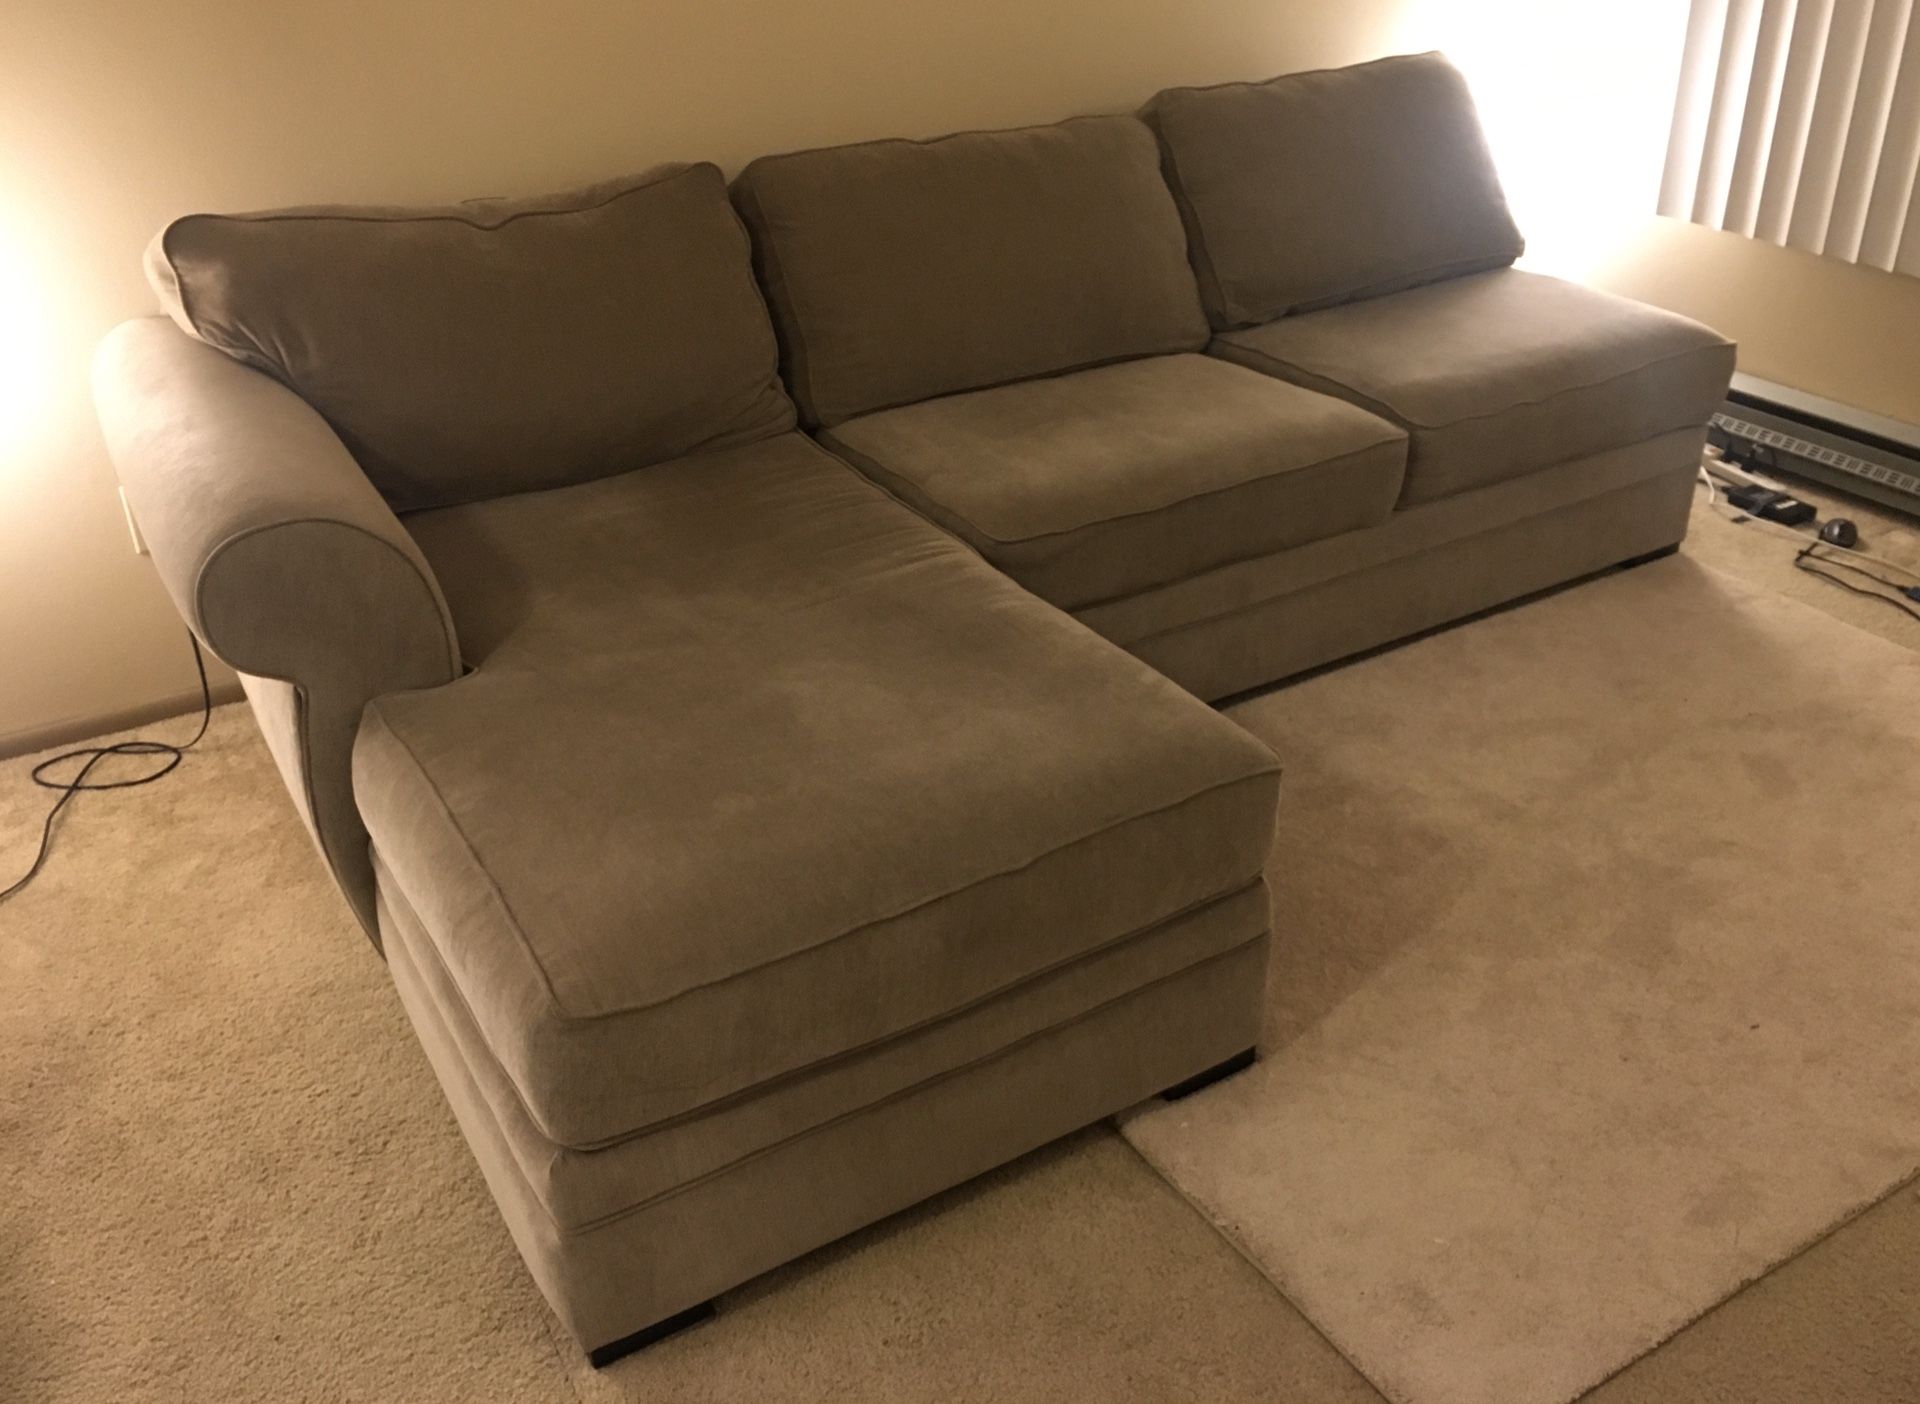 Sectional Couch Sofa - Left Side - Removable Cover